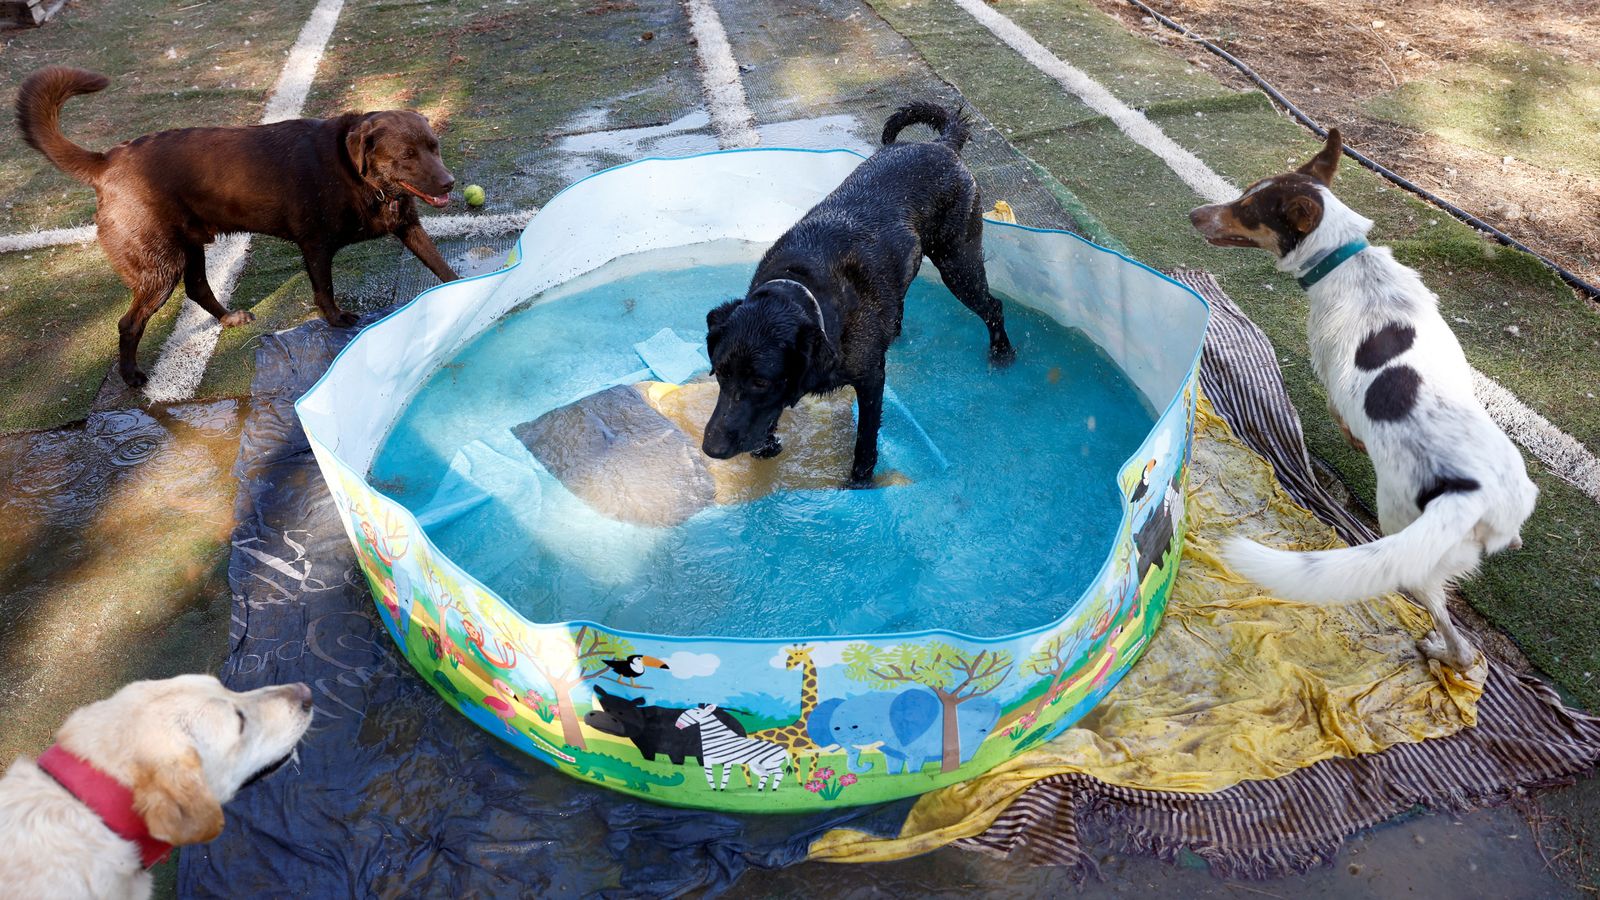 Dogs cool off in a paddling pool during the heatwave